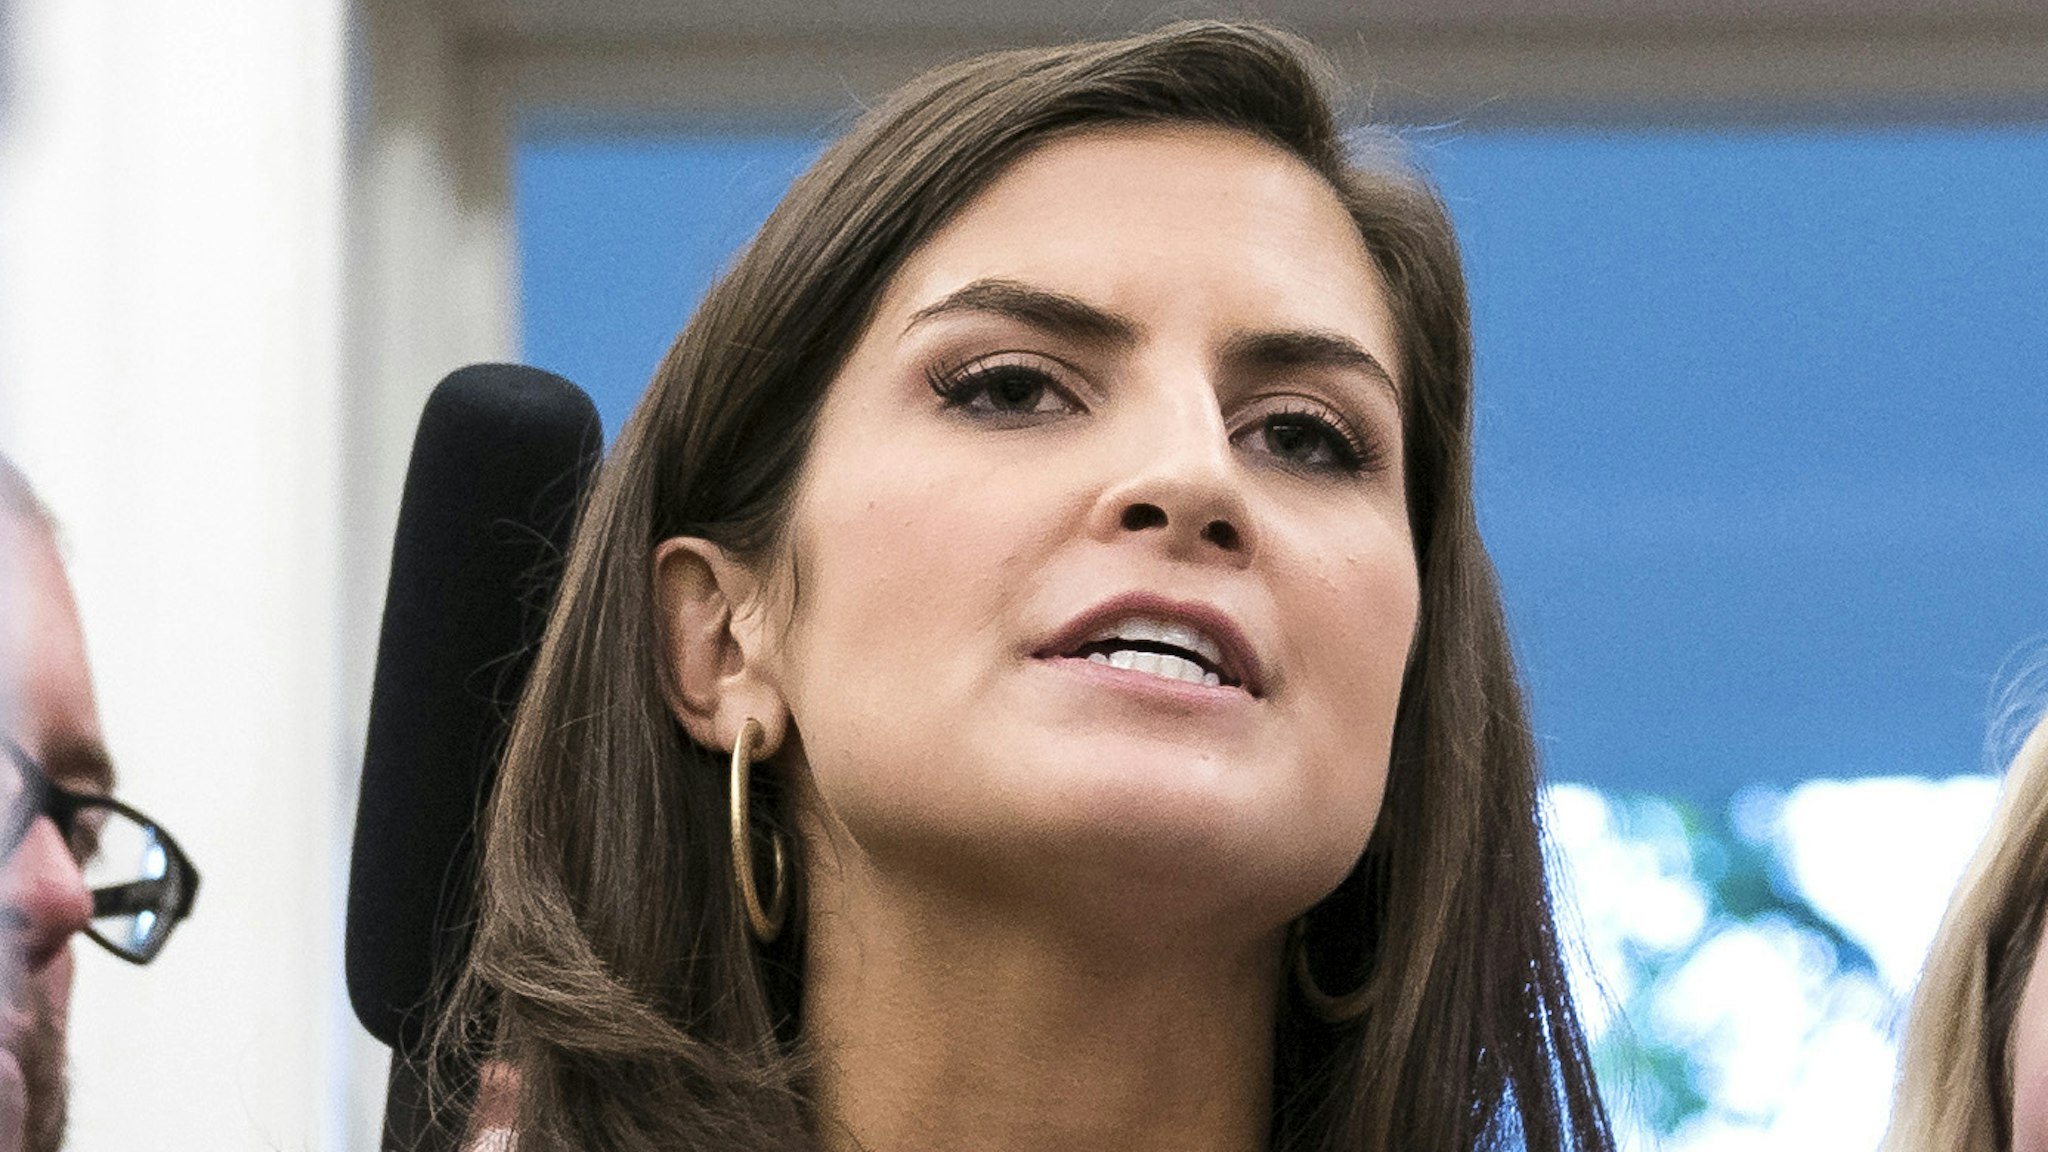 WASHINGTON, DC - JULY 30 : CNN White House Correspondent Kaitlan Collins asks questions of President Donald J. Trump as the press is escorted out after a swearing-in ceremony for the new Secretary of the Department of Veterans Affairs Robert Wilkie in the Oval Office at the White House on Monday, July 30, 2018 in Washington, DC.